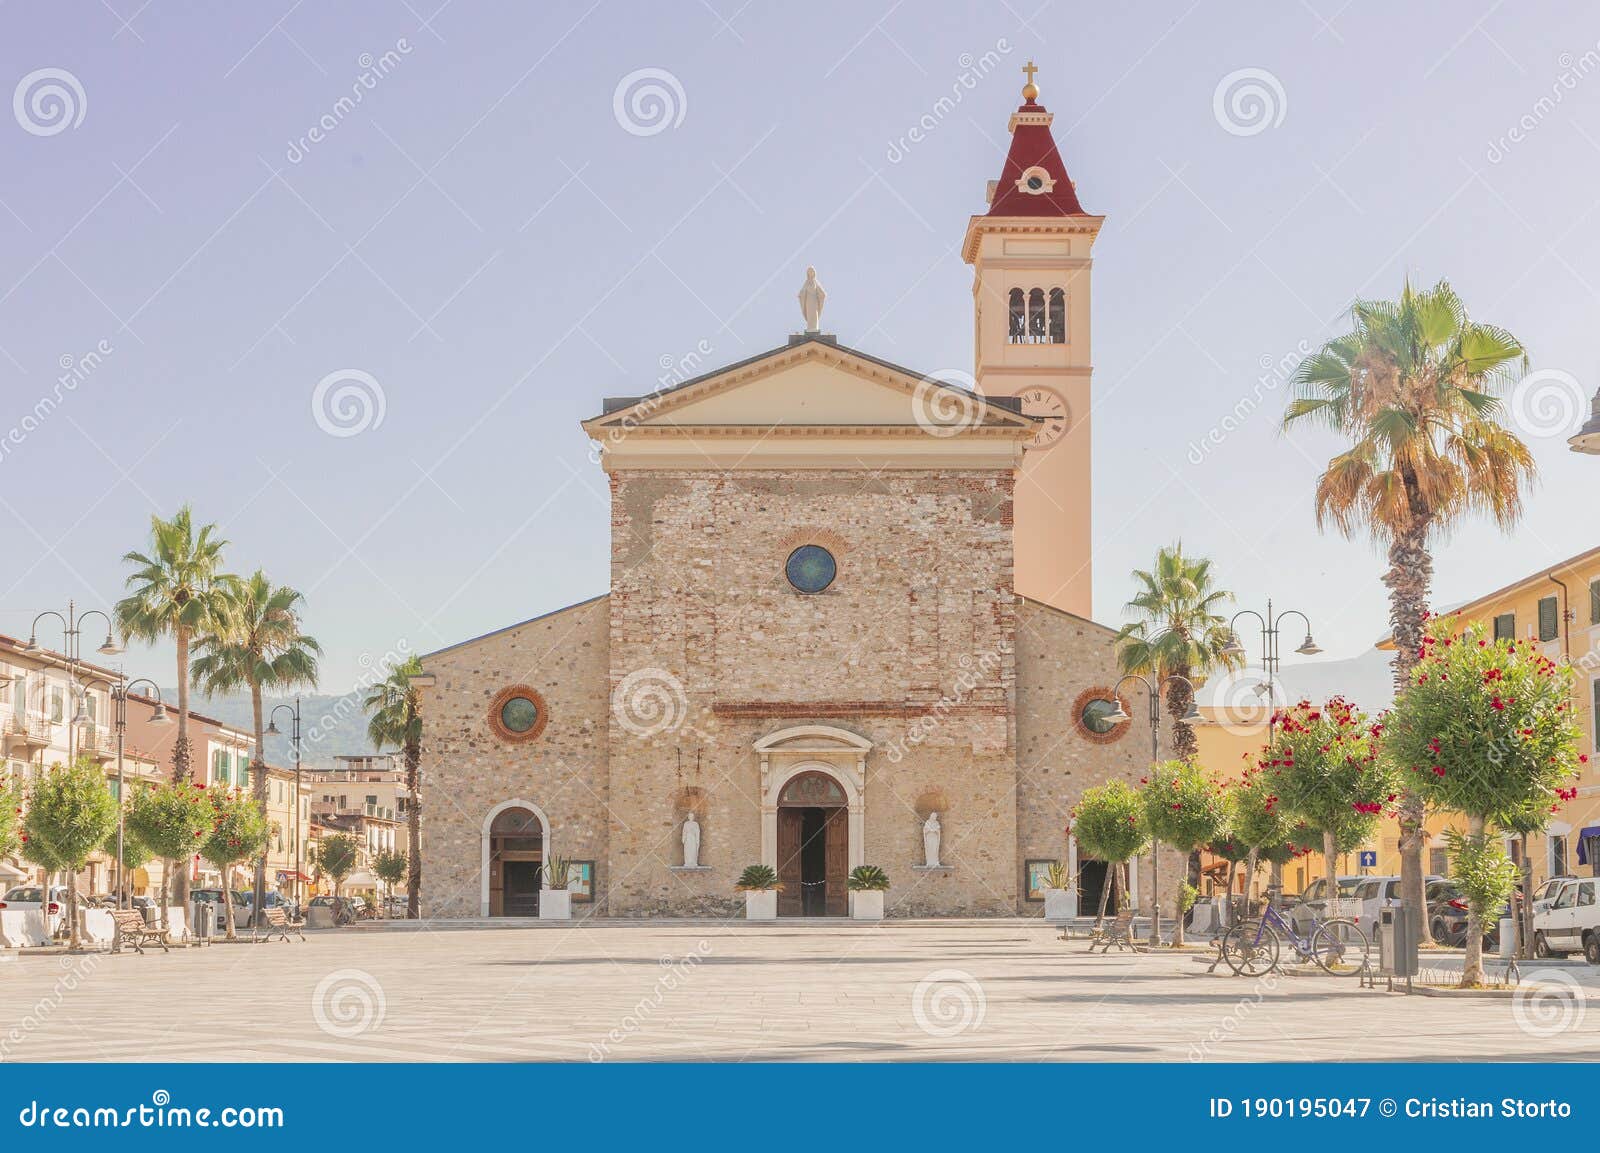 Marina Di Carrara, Italy: the Holy Family Church in Menconi Square  Editorial Photography - Image of aged, europe: 190195047